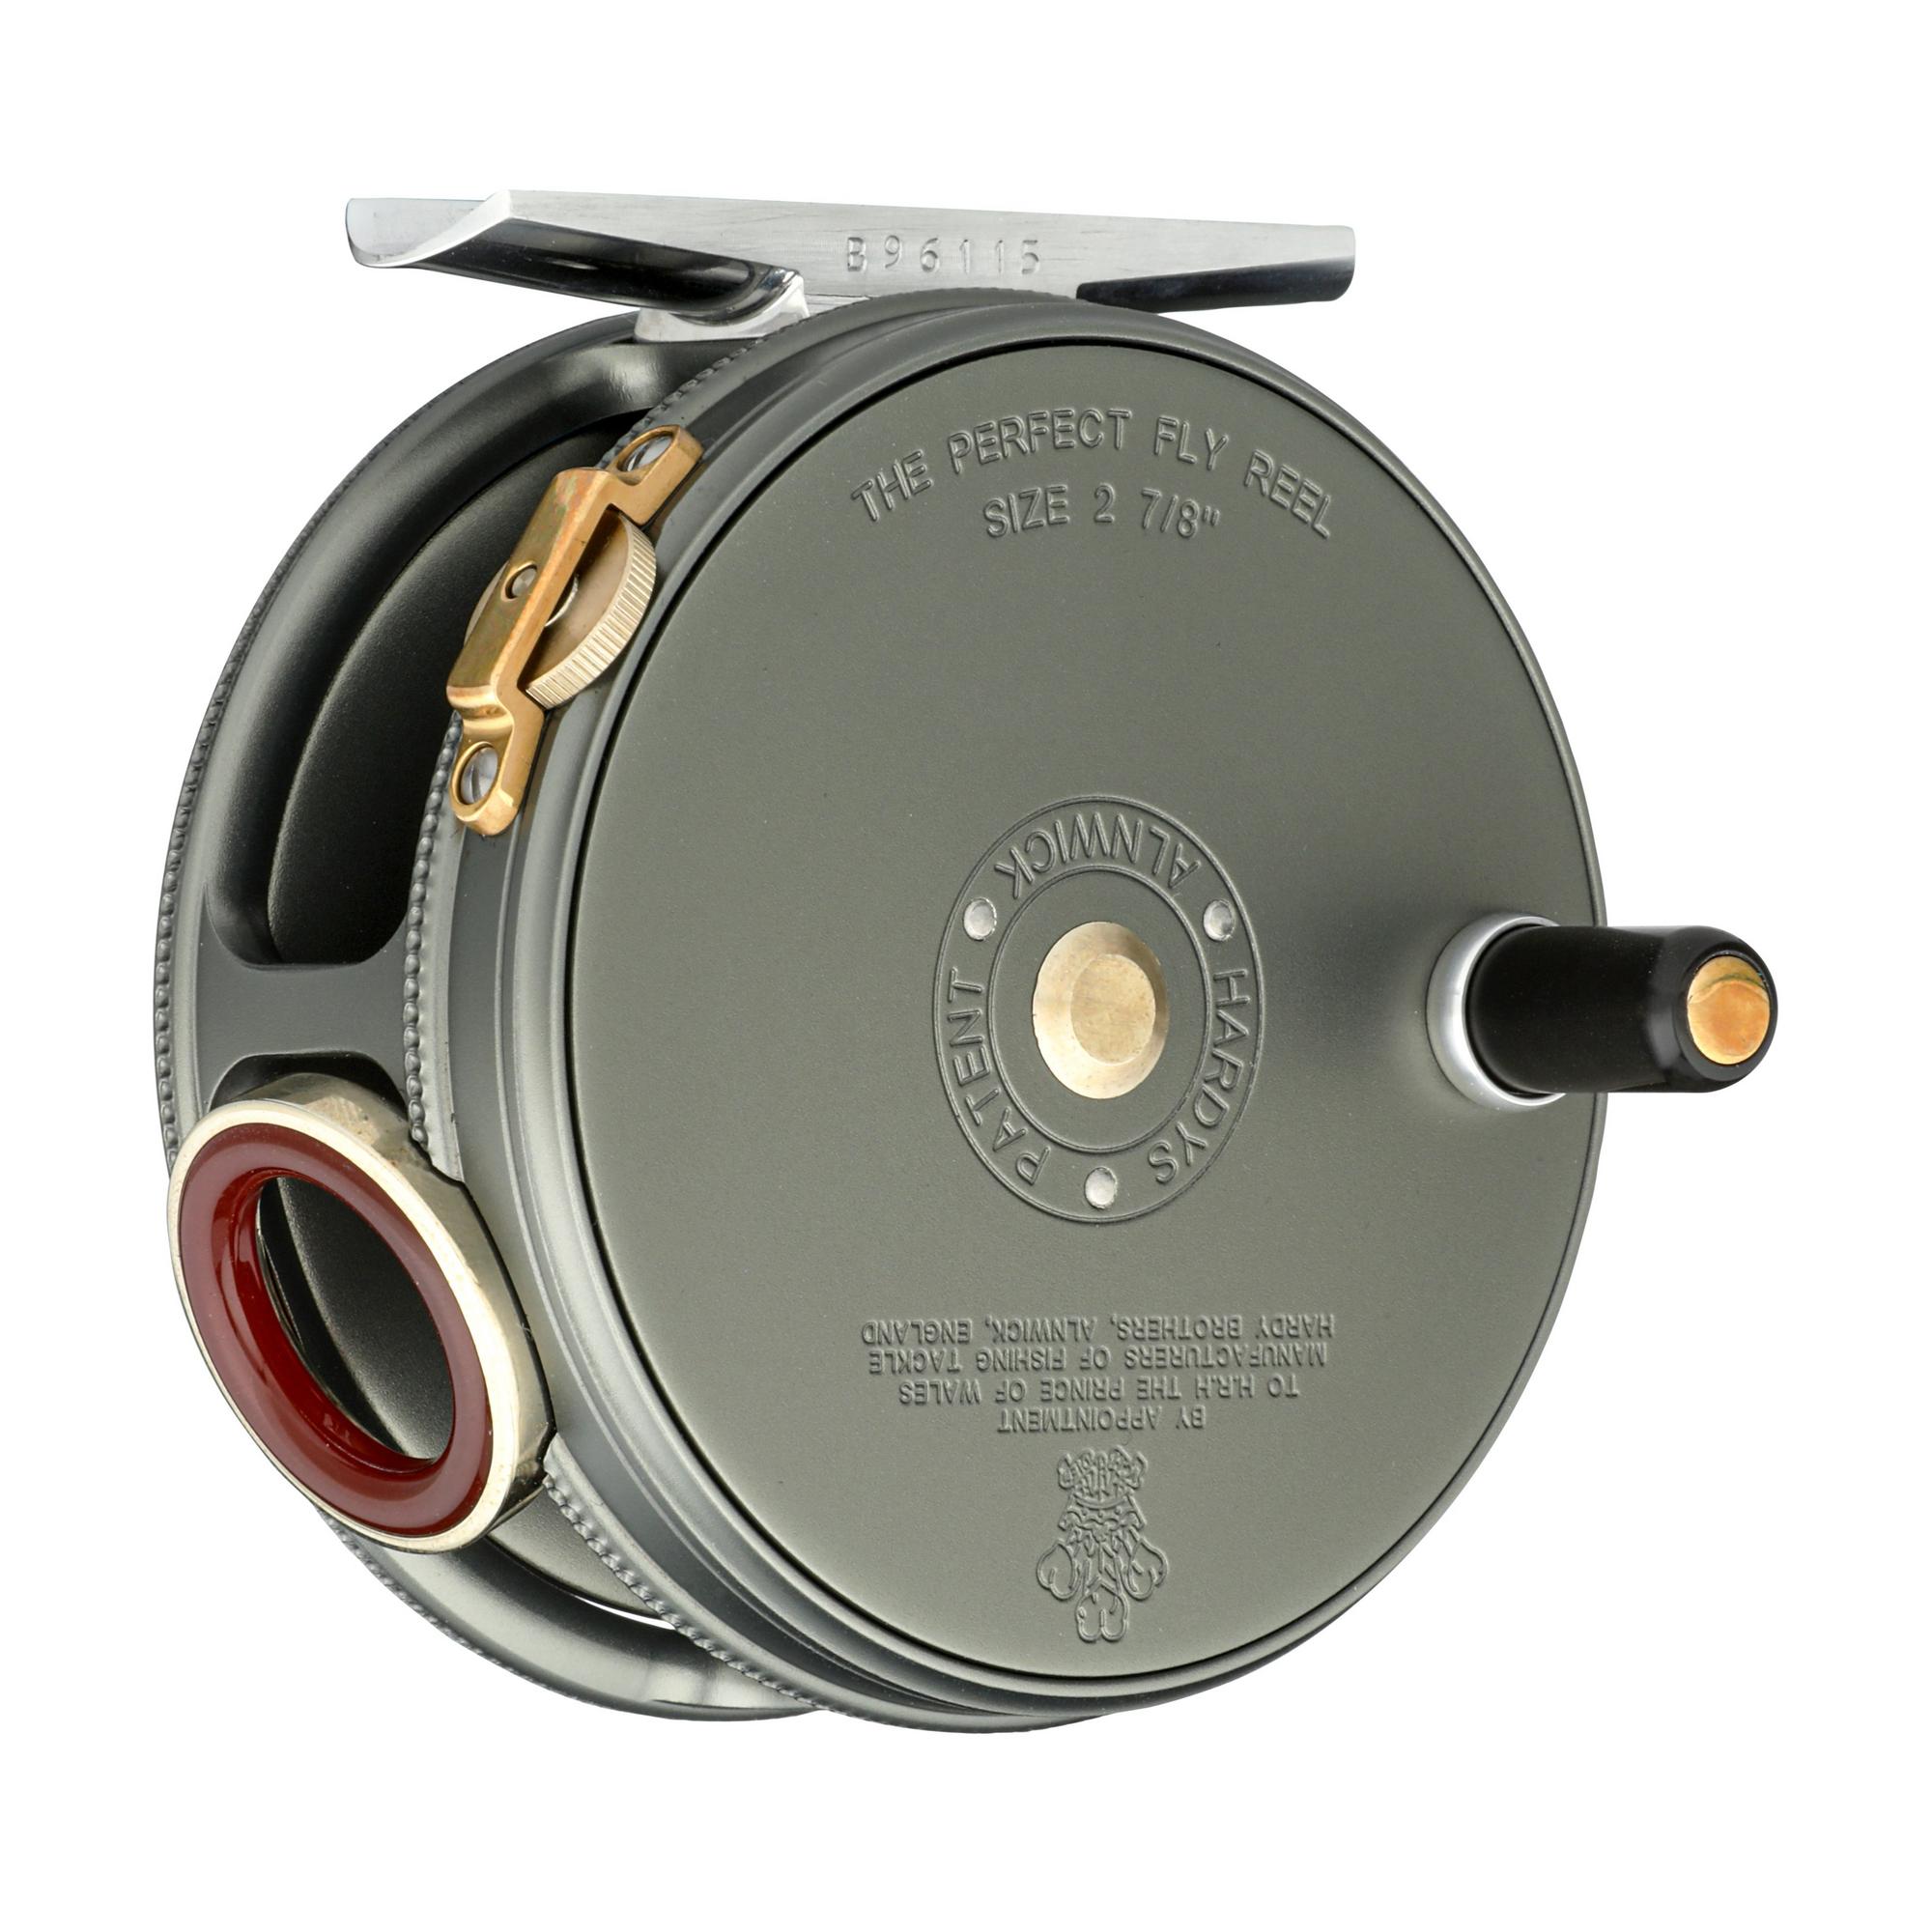 Different Hardy Fly Reel Check Mechanisms - The Classic Fly Rod Forum